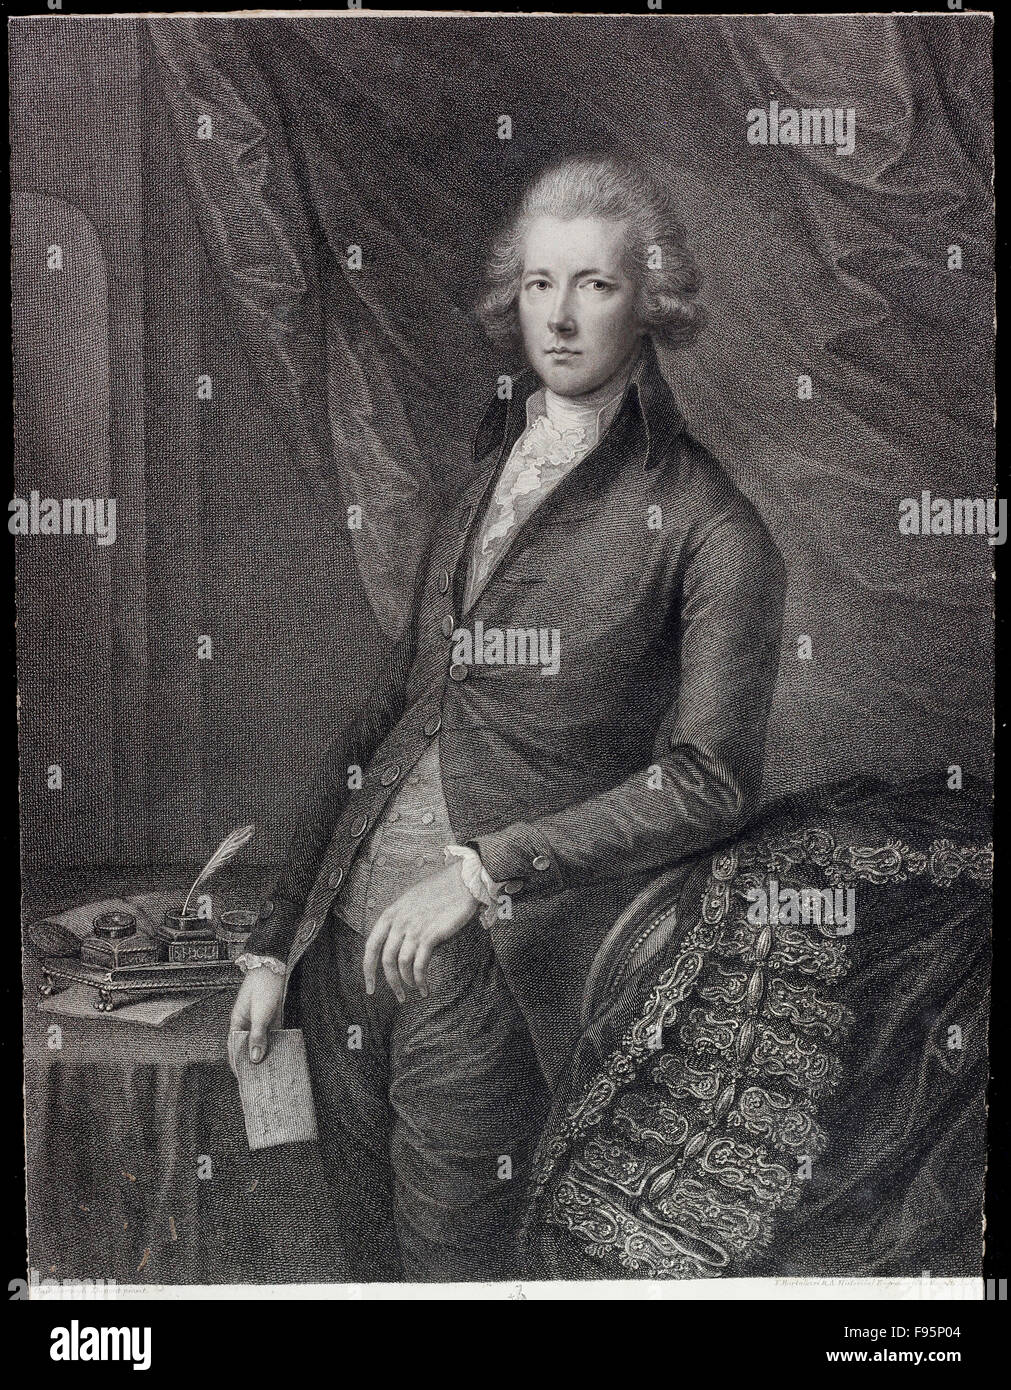 The Right Hon William Pitt the younger. Stock Photo